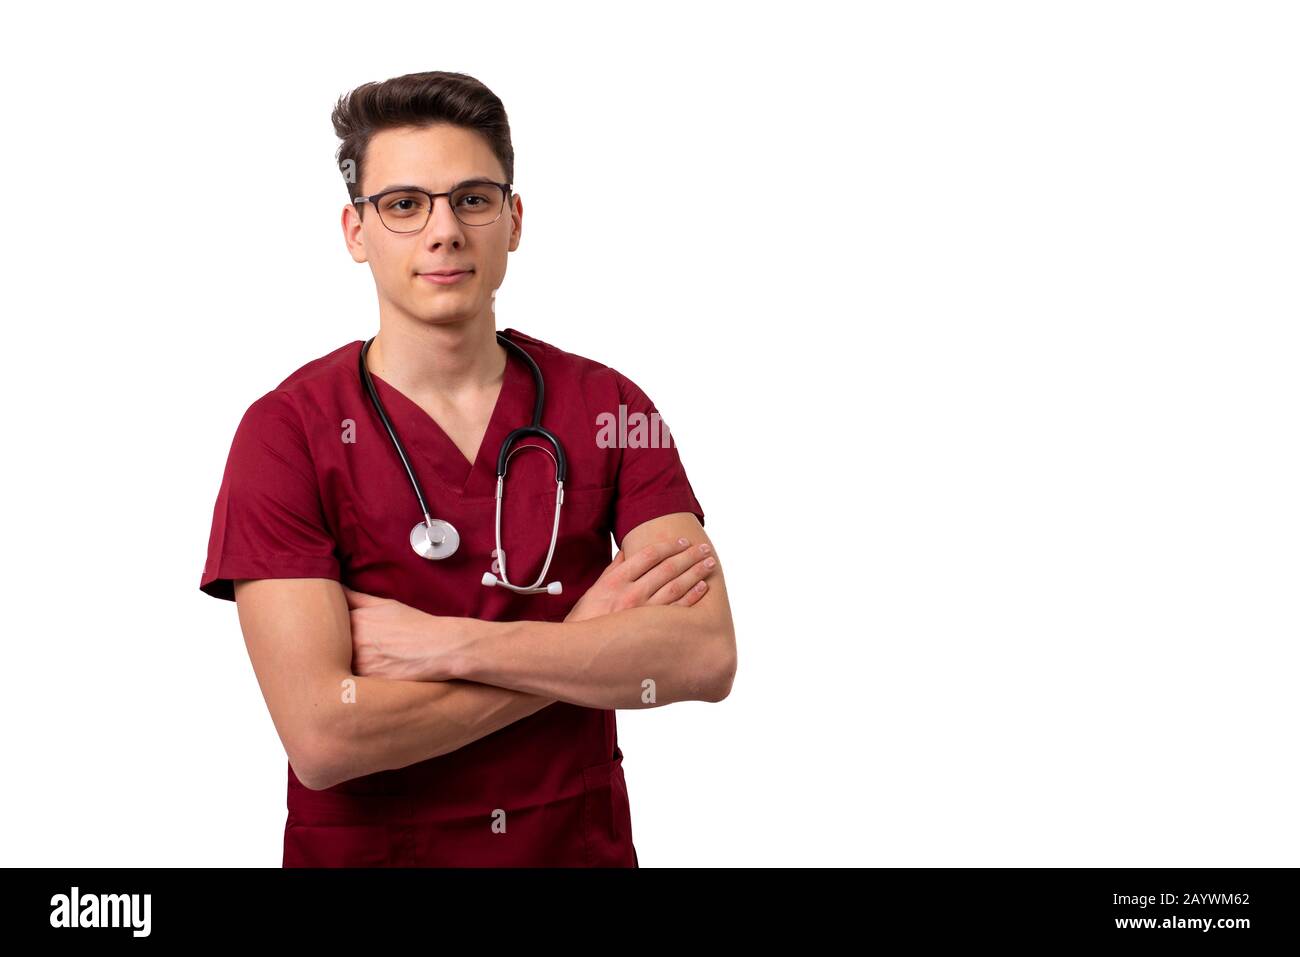 healthcare and medicine concept - young male doctor with stethoscope Stock Photo